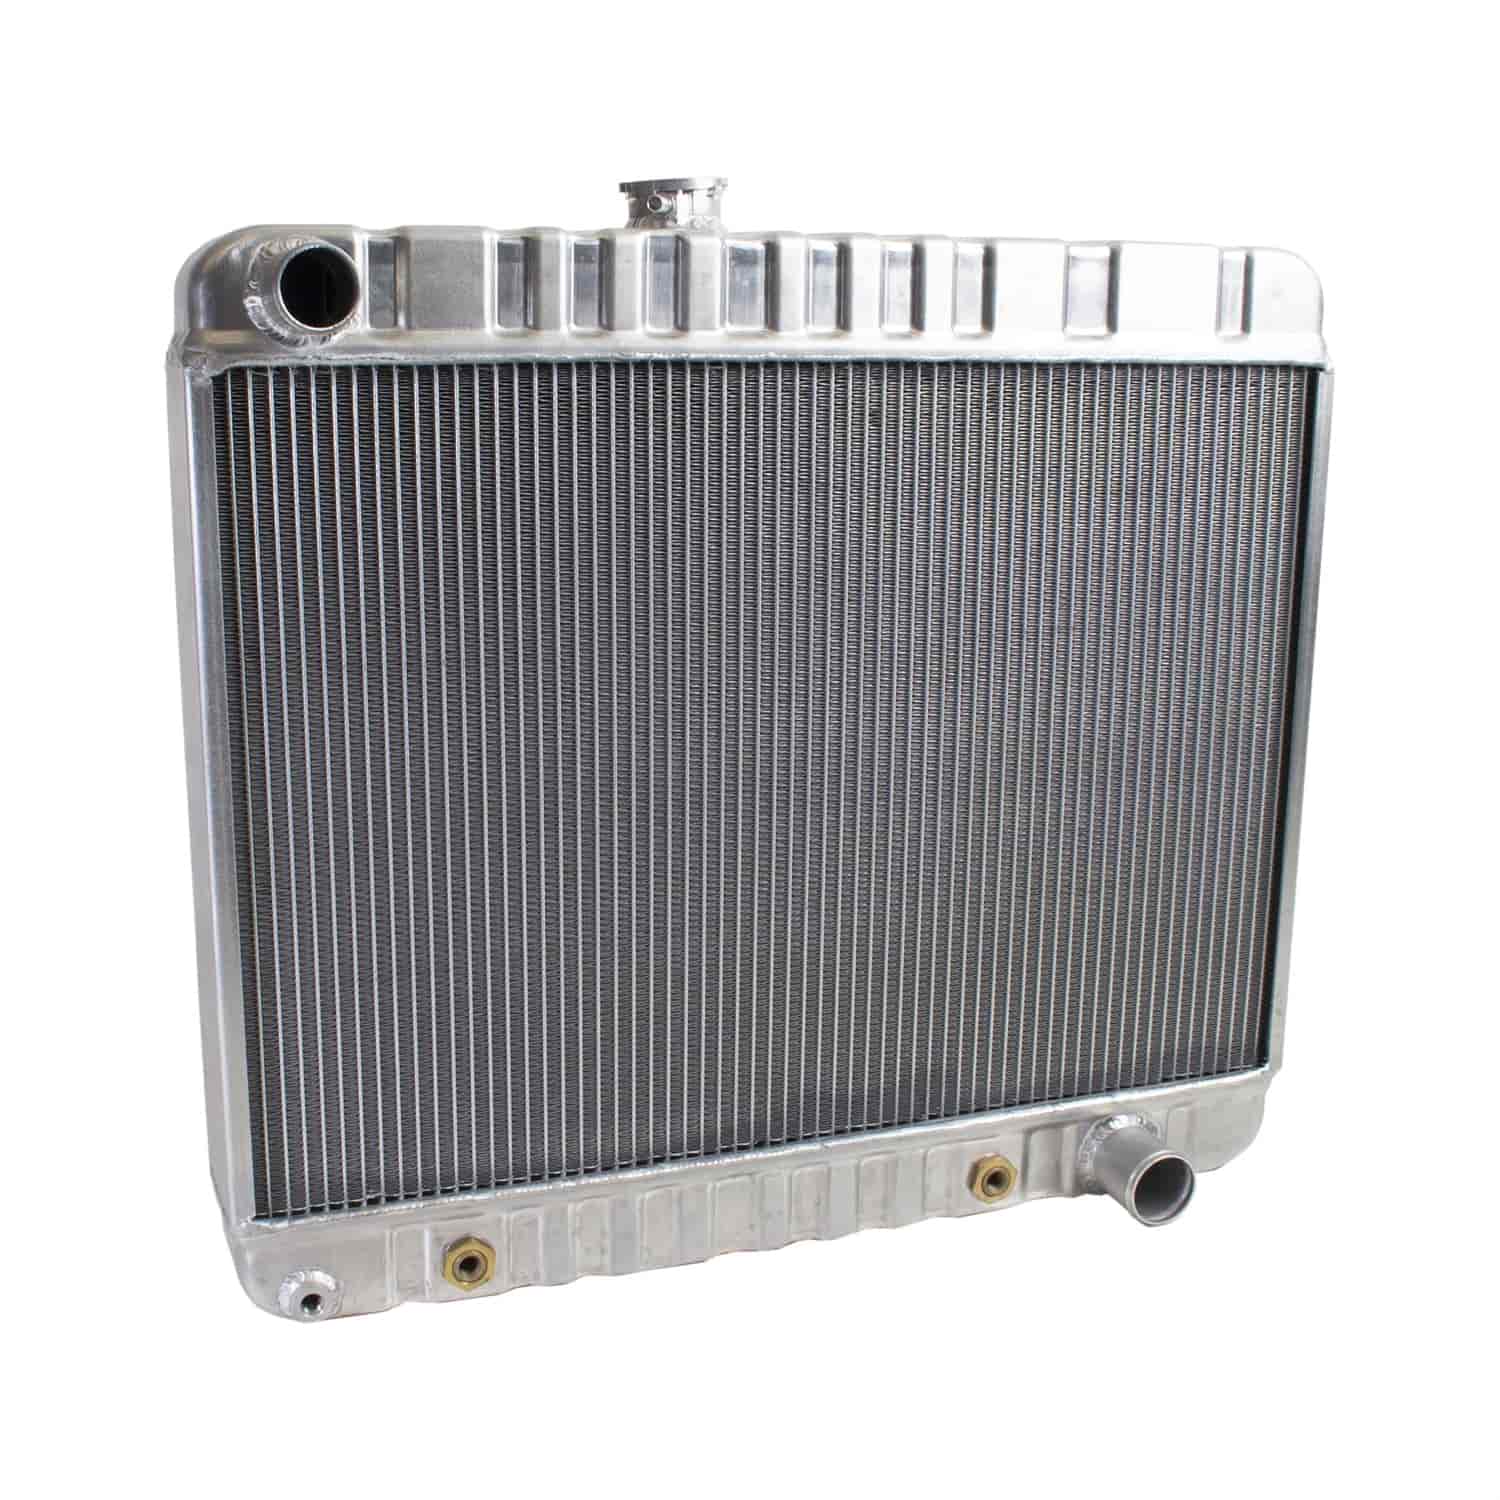 ExactFit Radiator for 1965-1967 GTO/Lemans/Tempest with Transmission Cooler